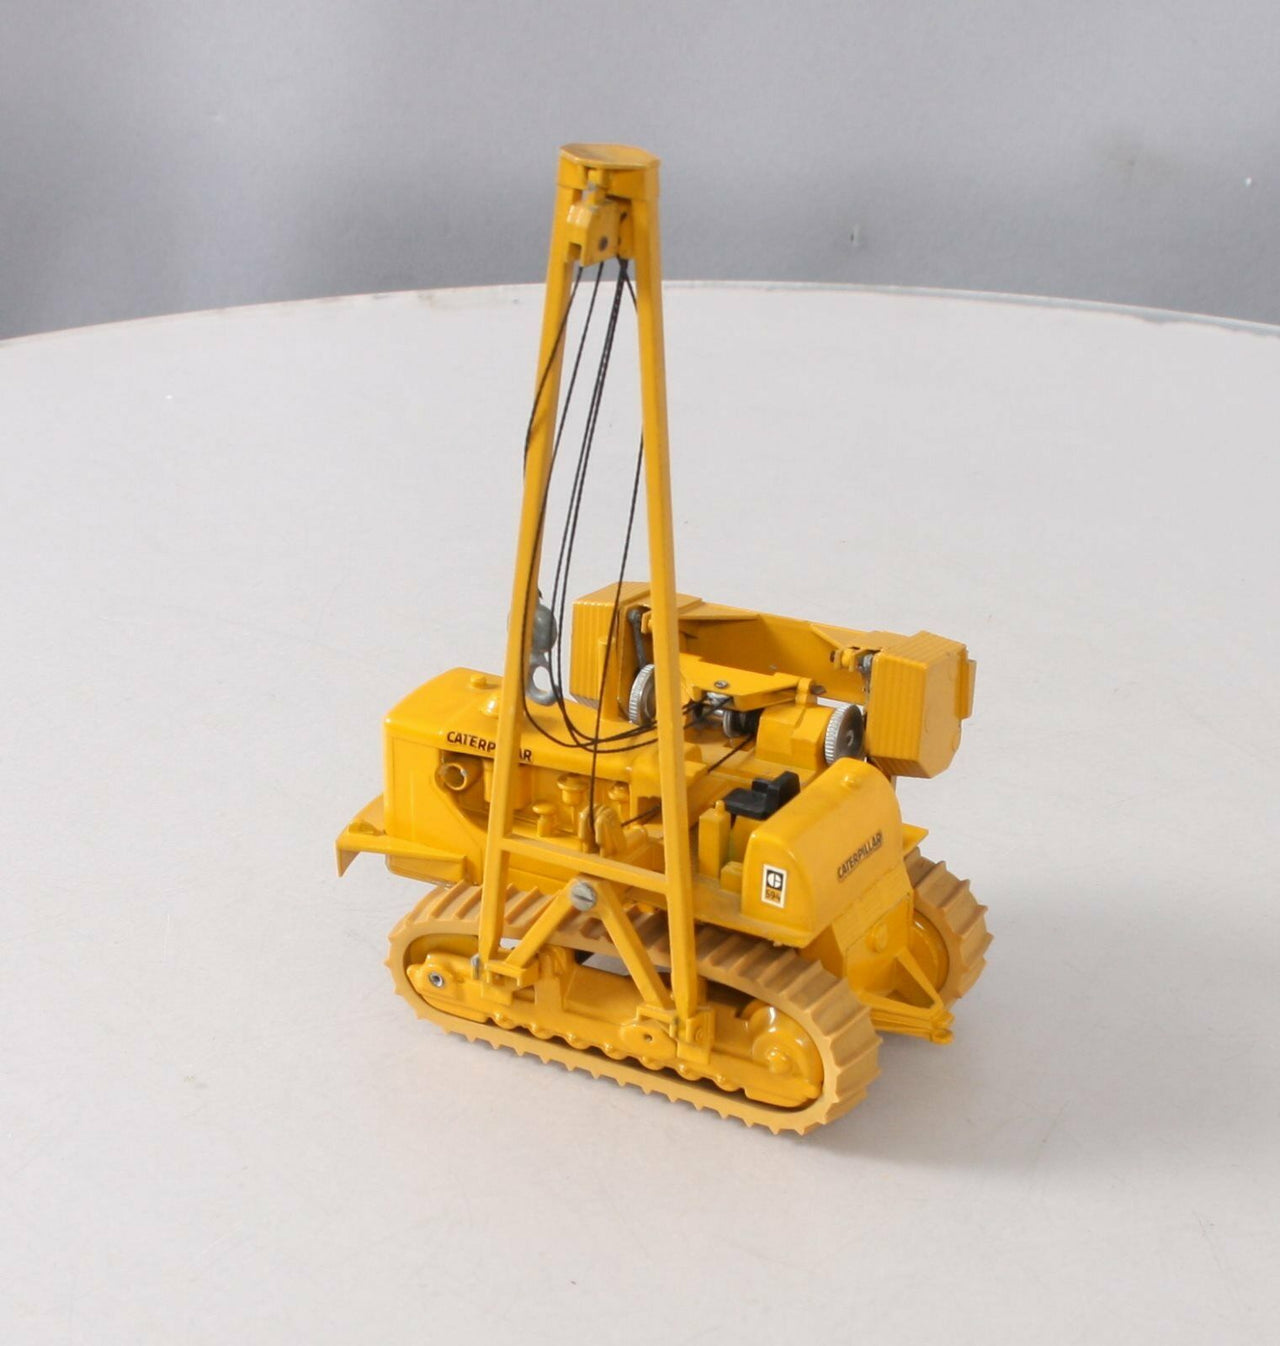 2872 Caterpillar 594 Pipe Laying Tractor 1:50 Scale (Discontinued Model)